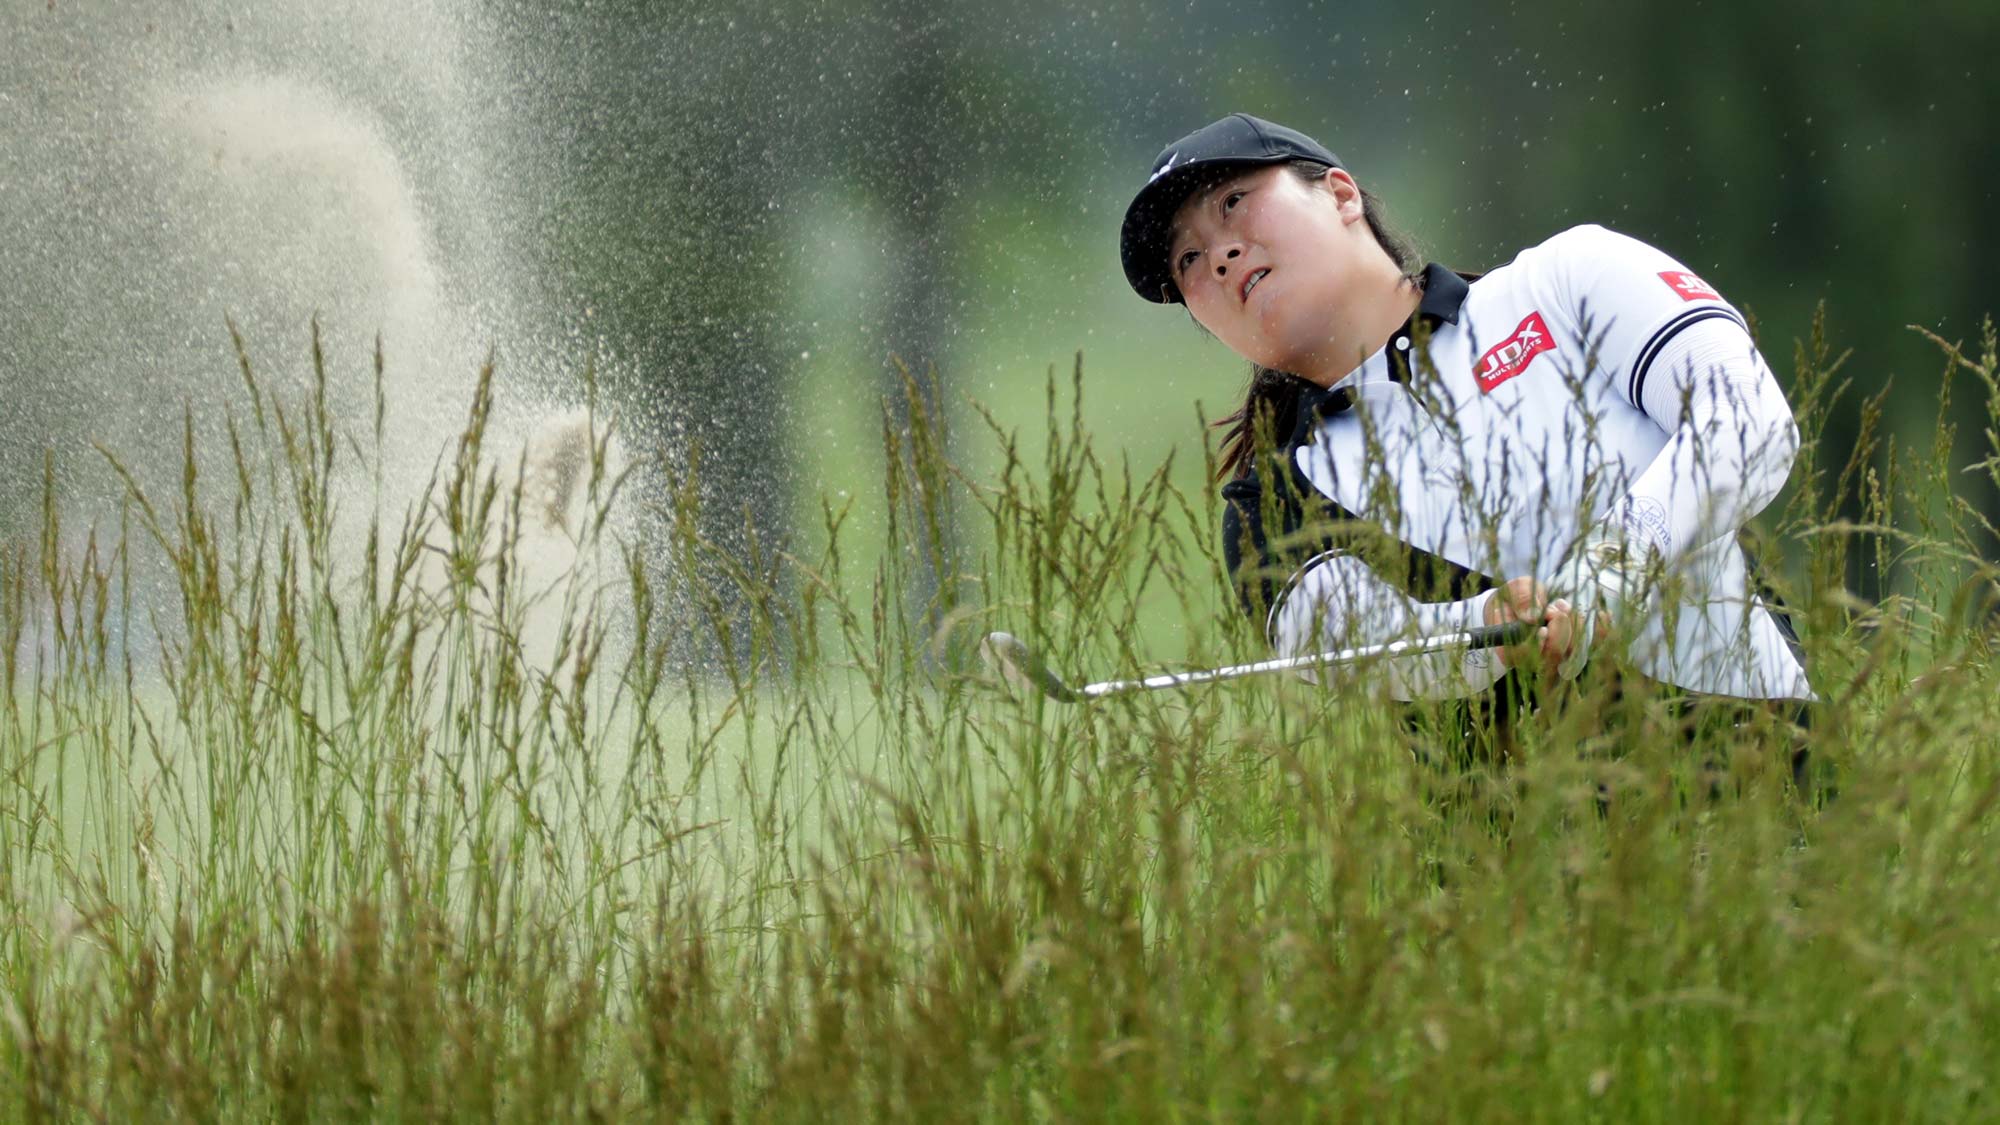 Angel Yin plays from a bunker on the fifth hole during the first round of the ShopRite LPGA Classic presented by Acer